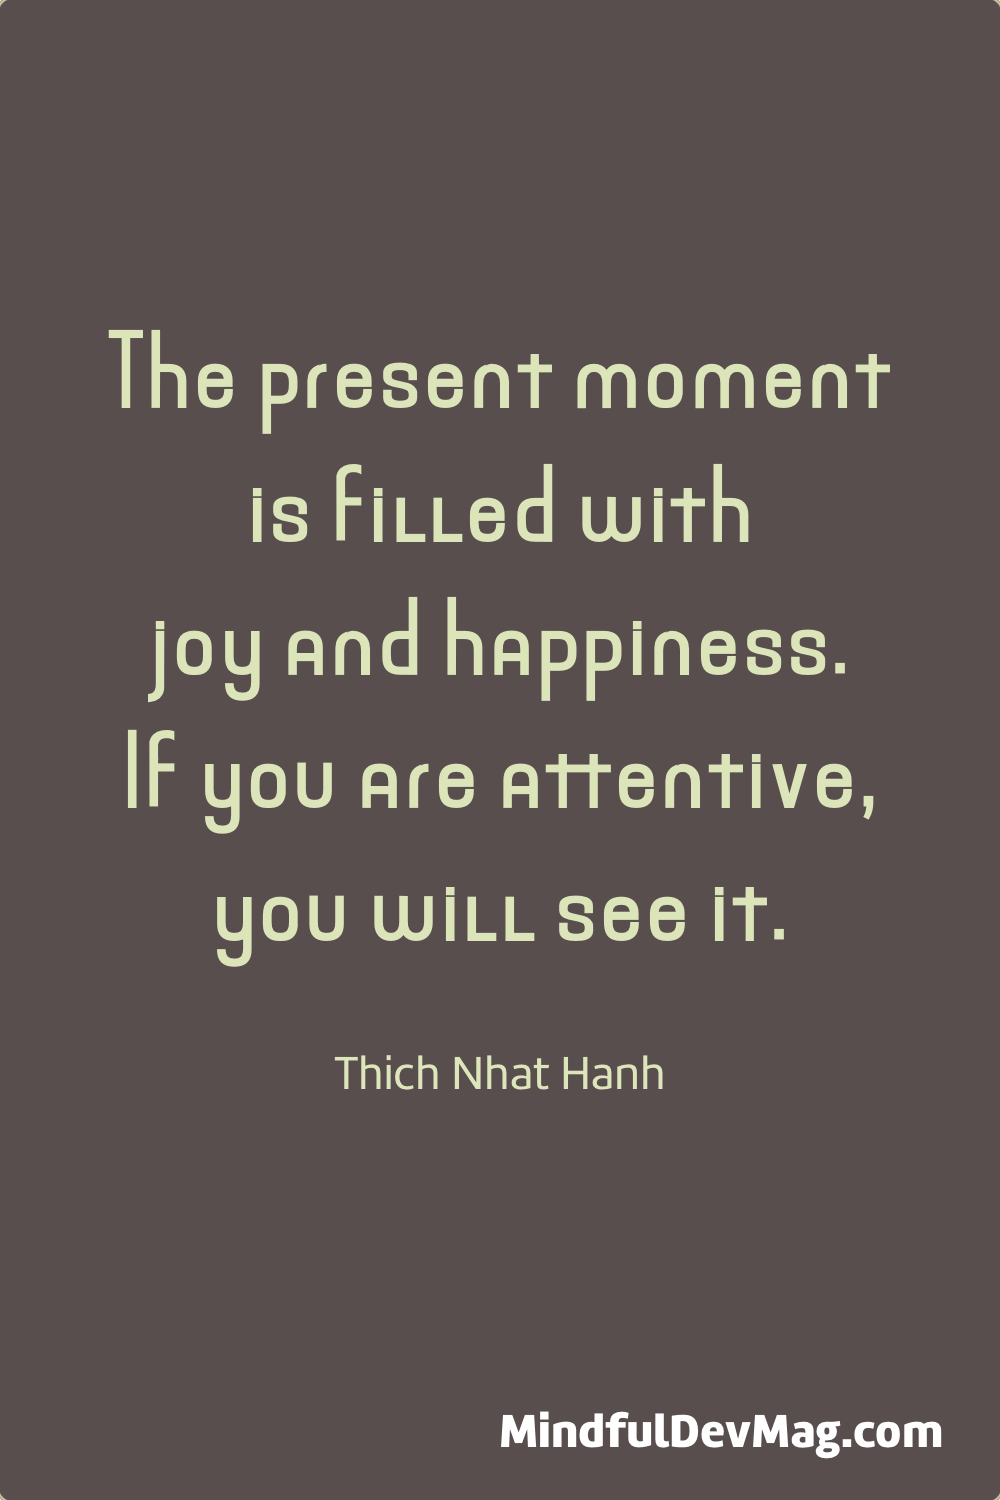 Mindful quote: The present moment is filled with joy and happiness. If you are attentive, you will see it. - Thich Nhat Hanh